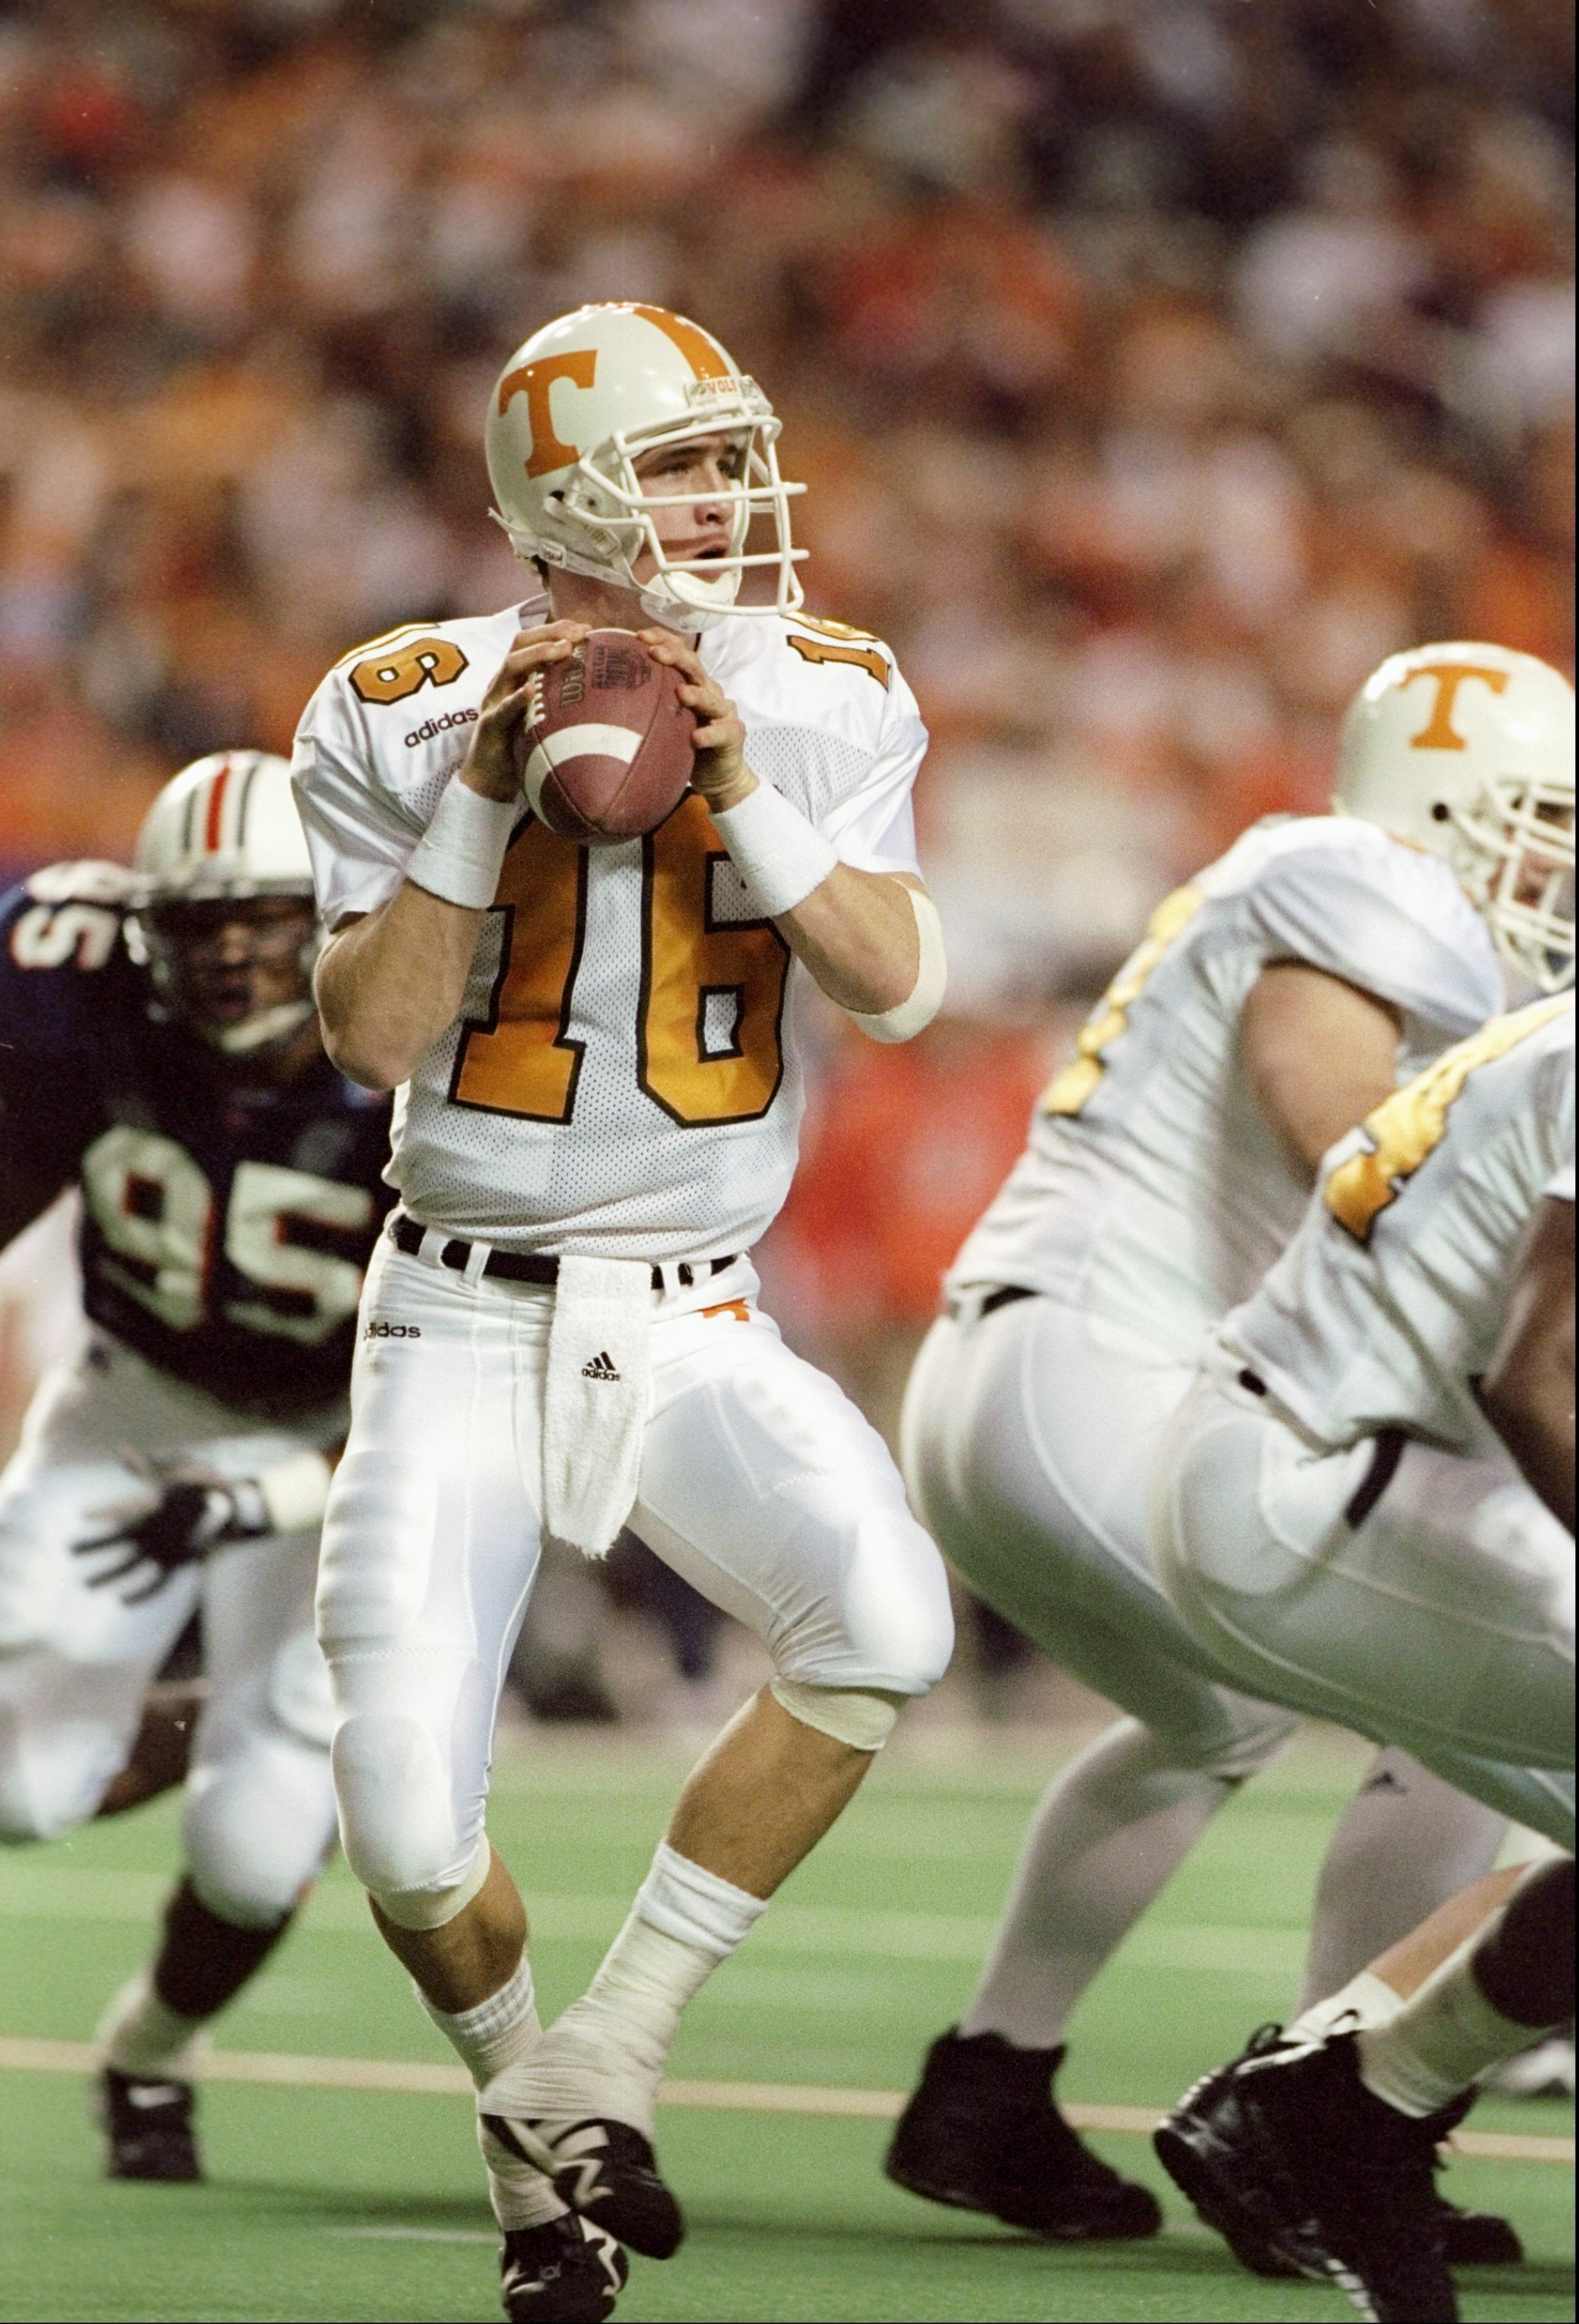 6 Dec 1997: Quarterback Peyton Manning #16 of Tennessee drops back to pass during the Volunteers 30-29 win over Auburn in the SEC Championship at the Georgia Dome in Atlanta, Georgia.